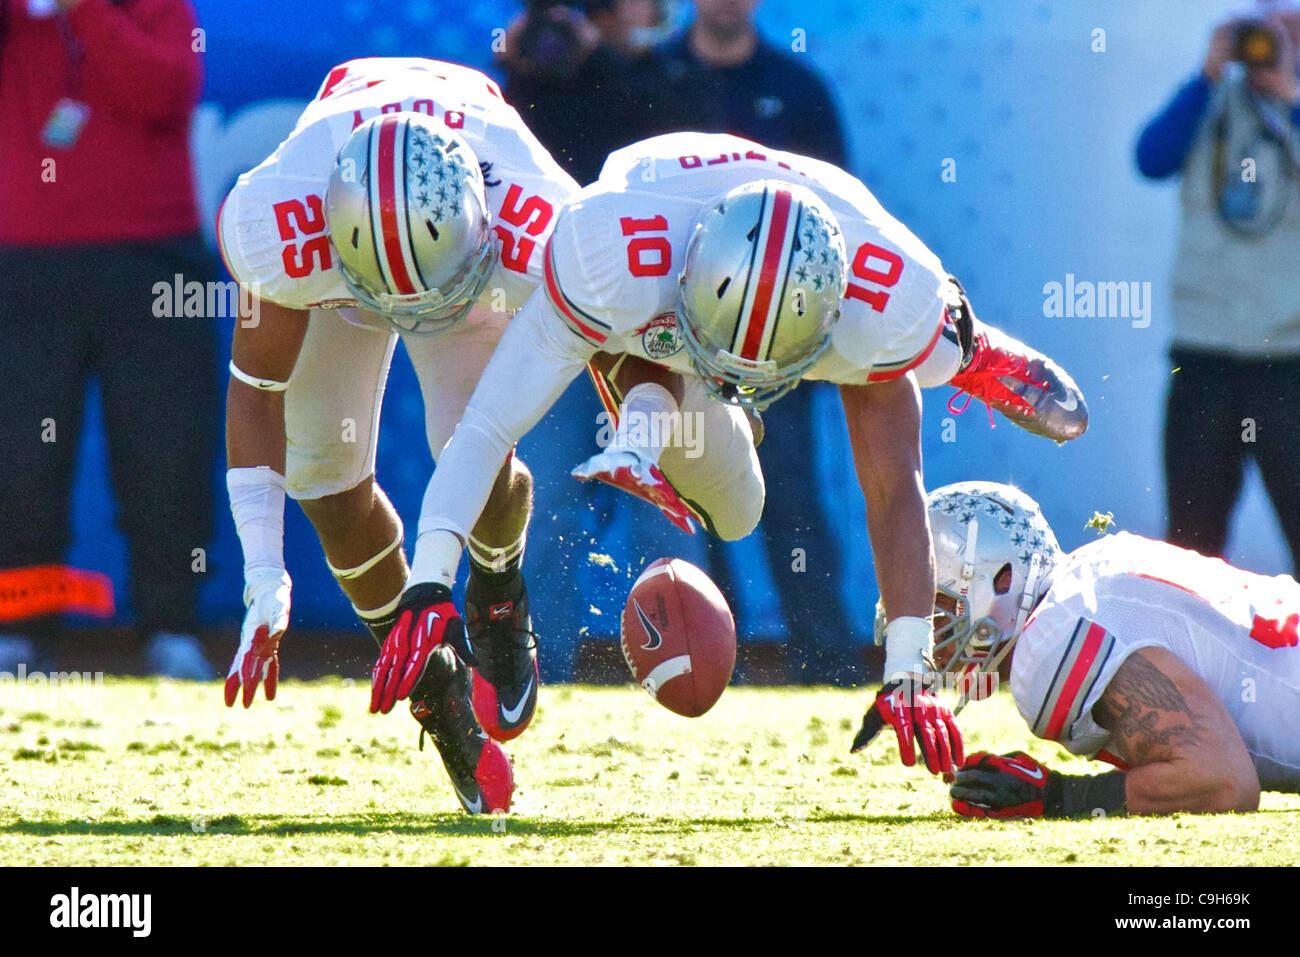 Jan. 2, 2012 - Jacksonville, Florida, U.S - Ohio State Buckeyes defensive back Bradley Roby (25) and Ohio State Buckeyes linebacker Ryan Shazier (10) go after a fumble in the first quarter of the game between Ohio State and Florida in the Gator Bowl at Everbank Field, Jacksonville, Florida. Florida  Stock Photo